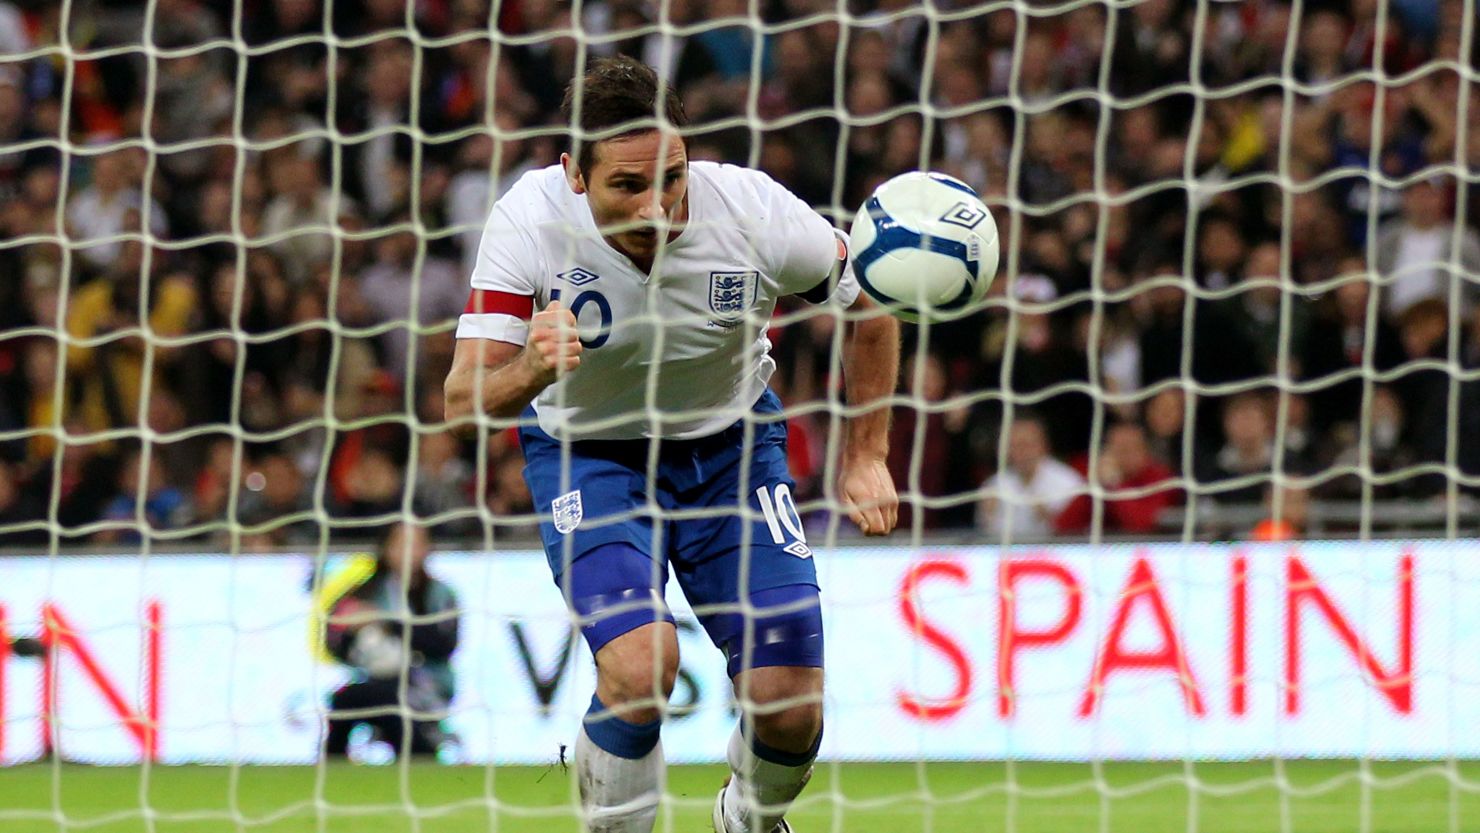 Frank Lampard stoops to head the only goal of the game for England at Wembley